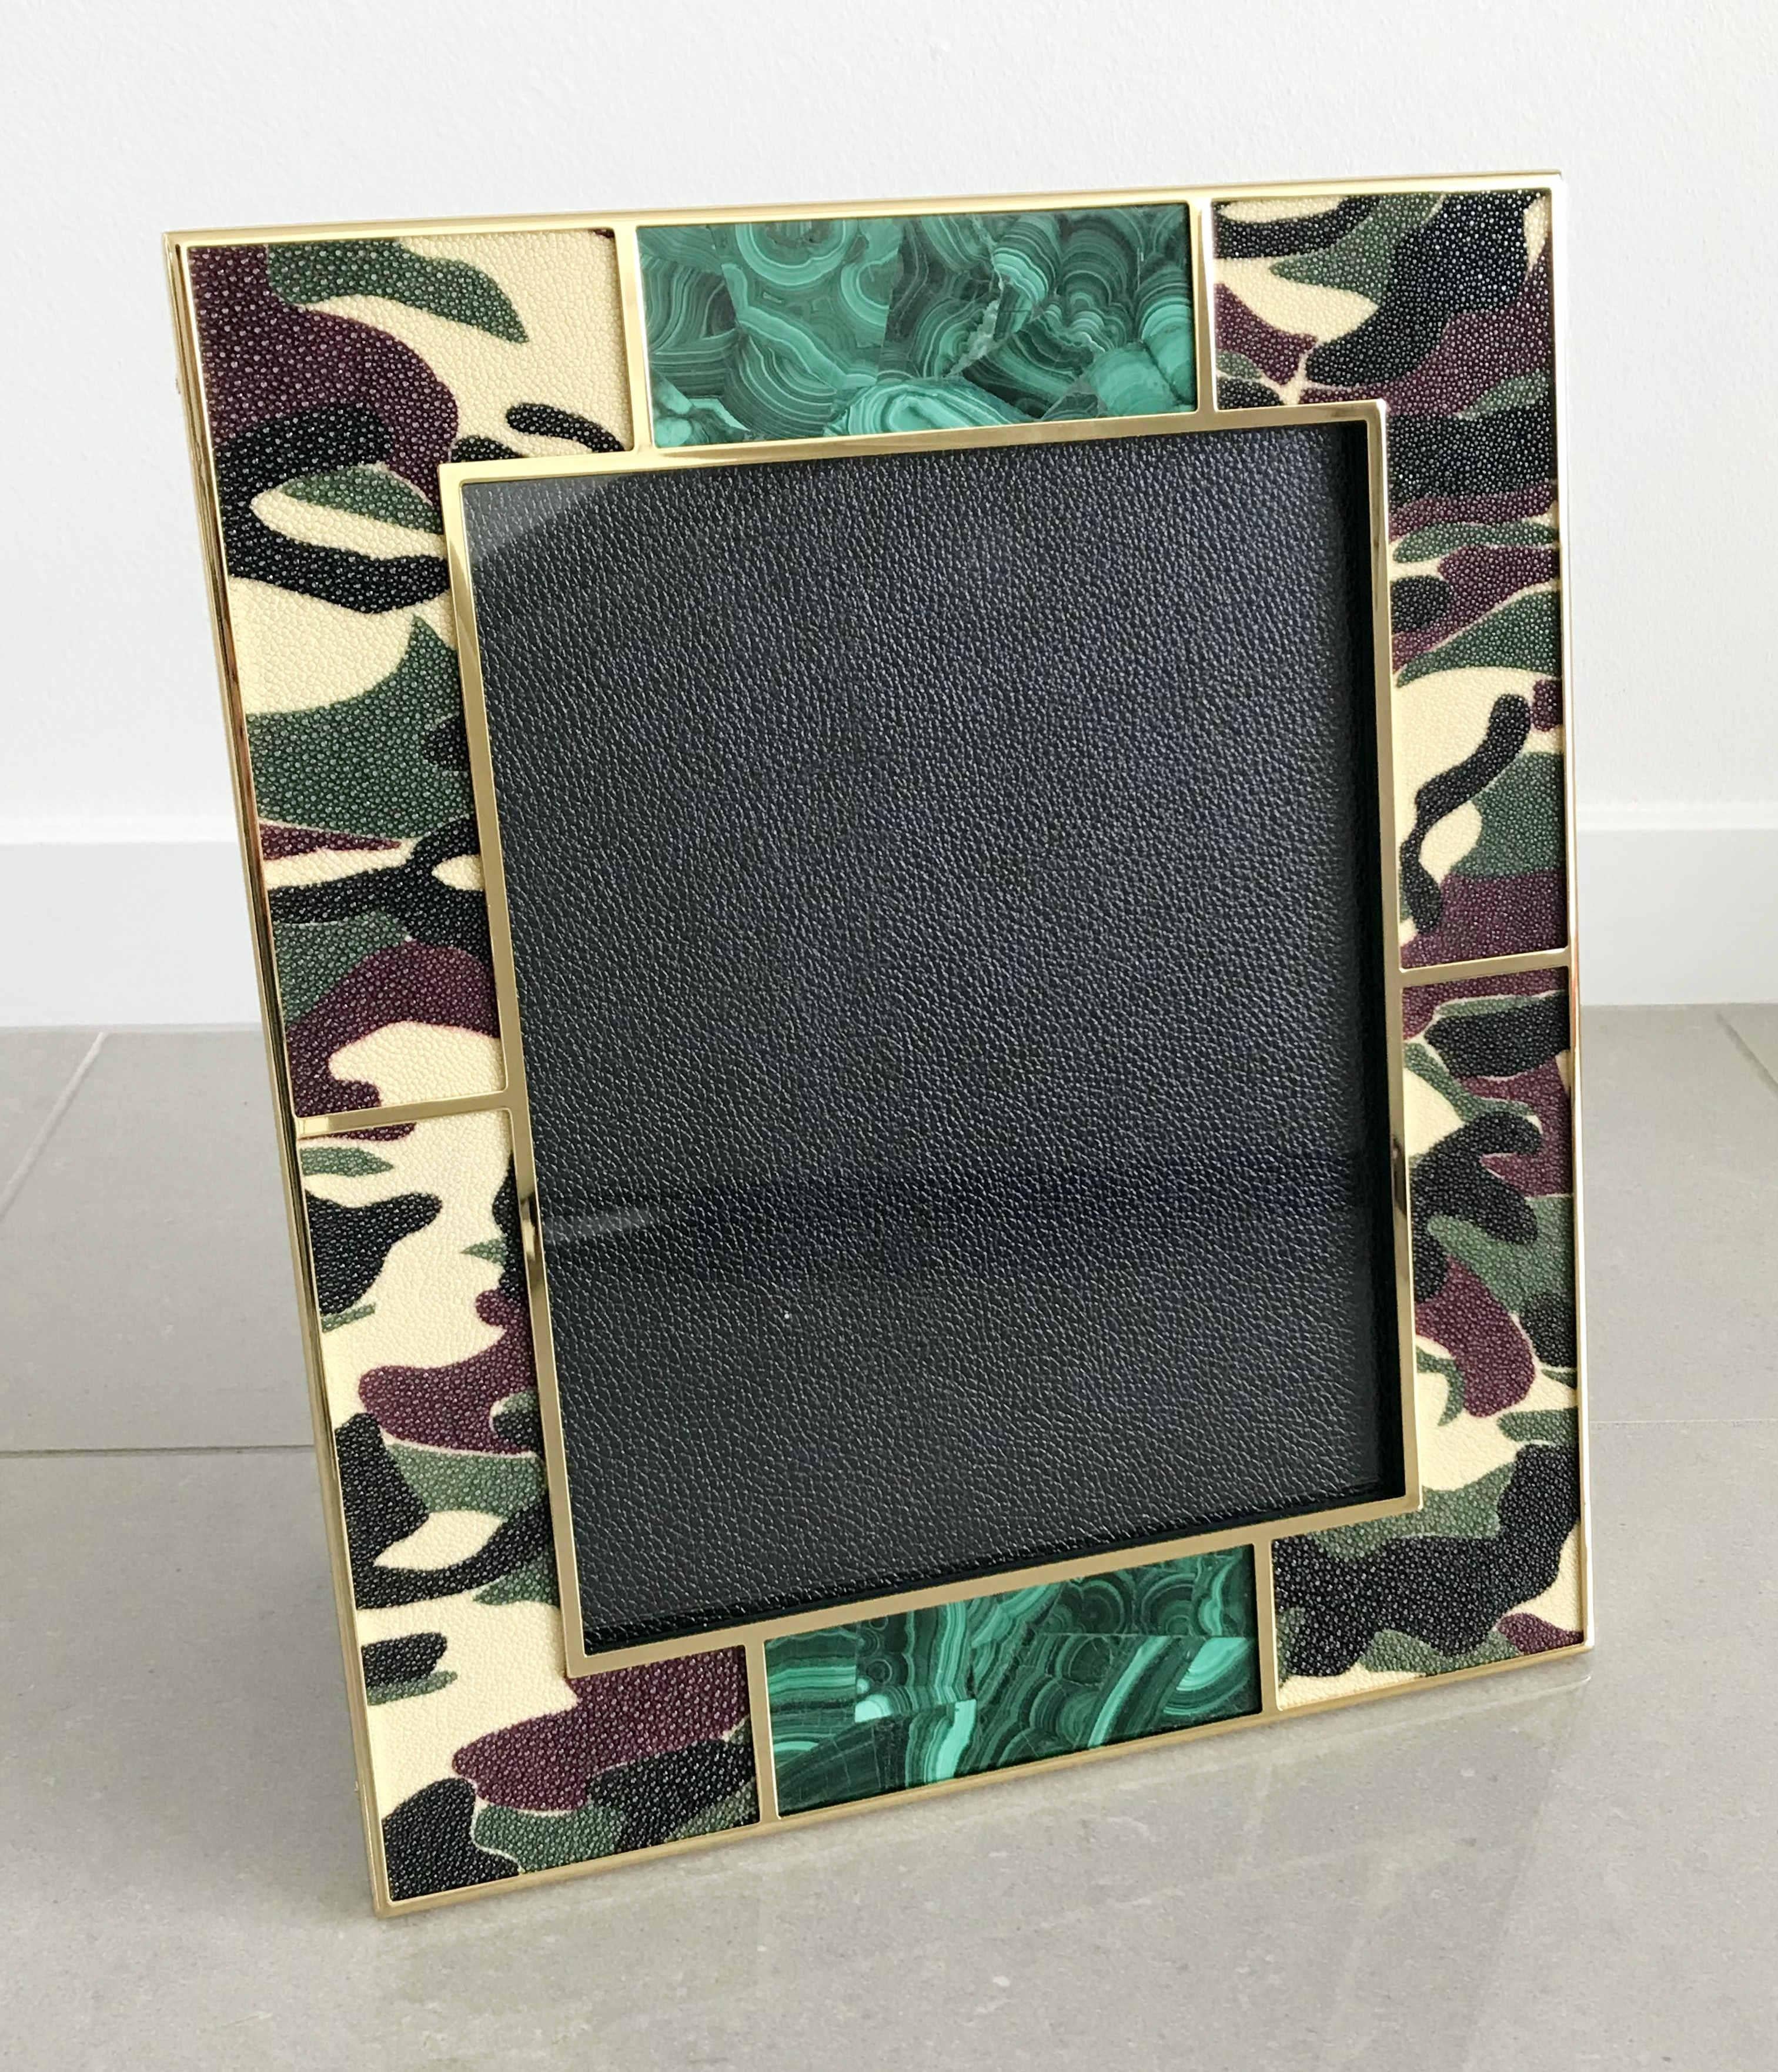 Camouflage colored shagreen leather with malachite inserts and 24-karat gold-plated picture frame by Fabio Ltd
Measures: Height 13.5 inches, width 11.5 inches, depth 1 inch
Photo size: 8 inches by 10 inches
LAST one in stock in Palm Springs ON 20%